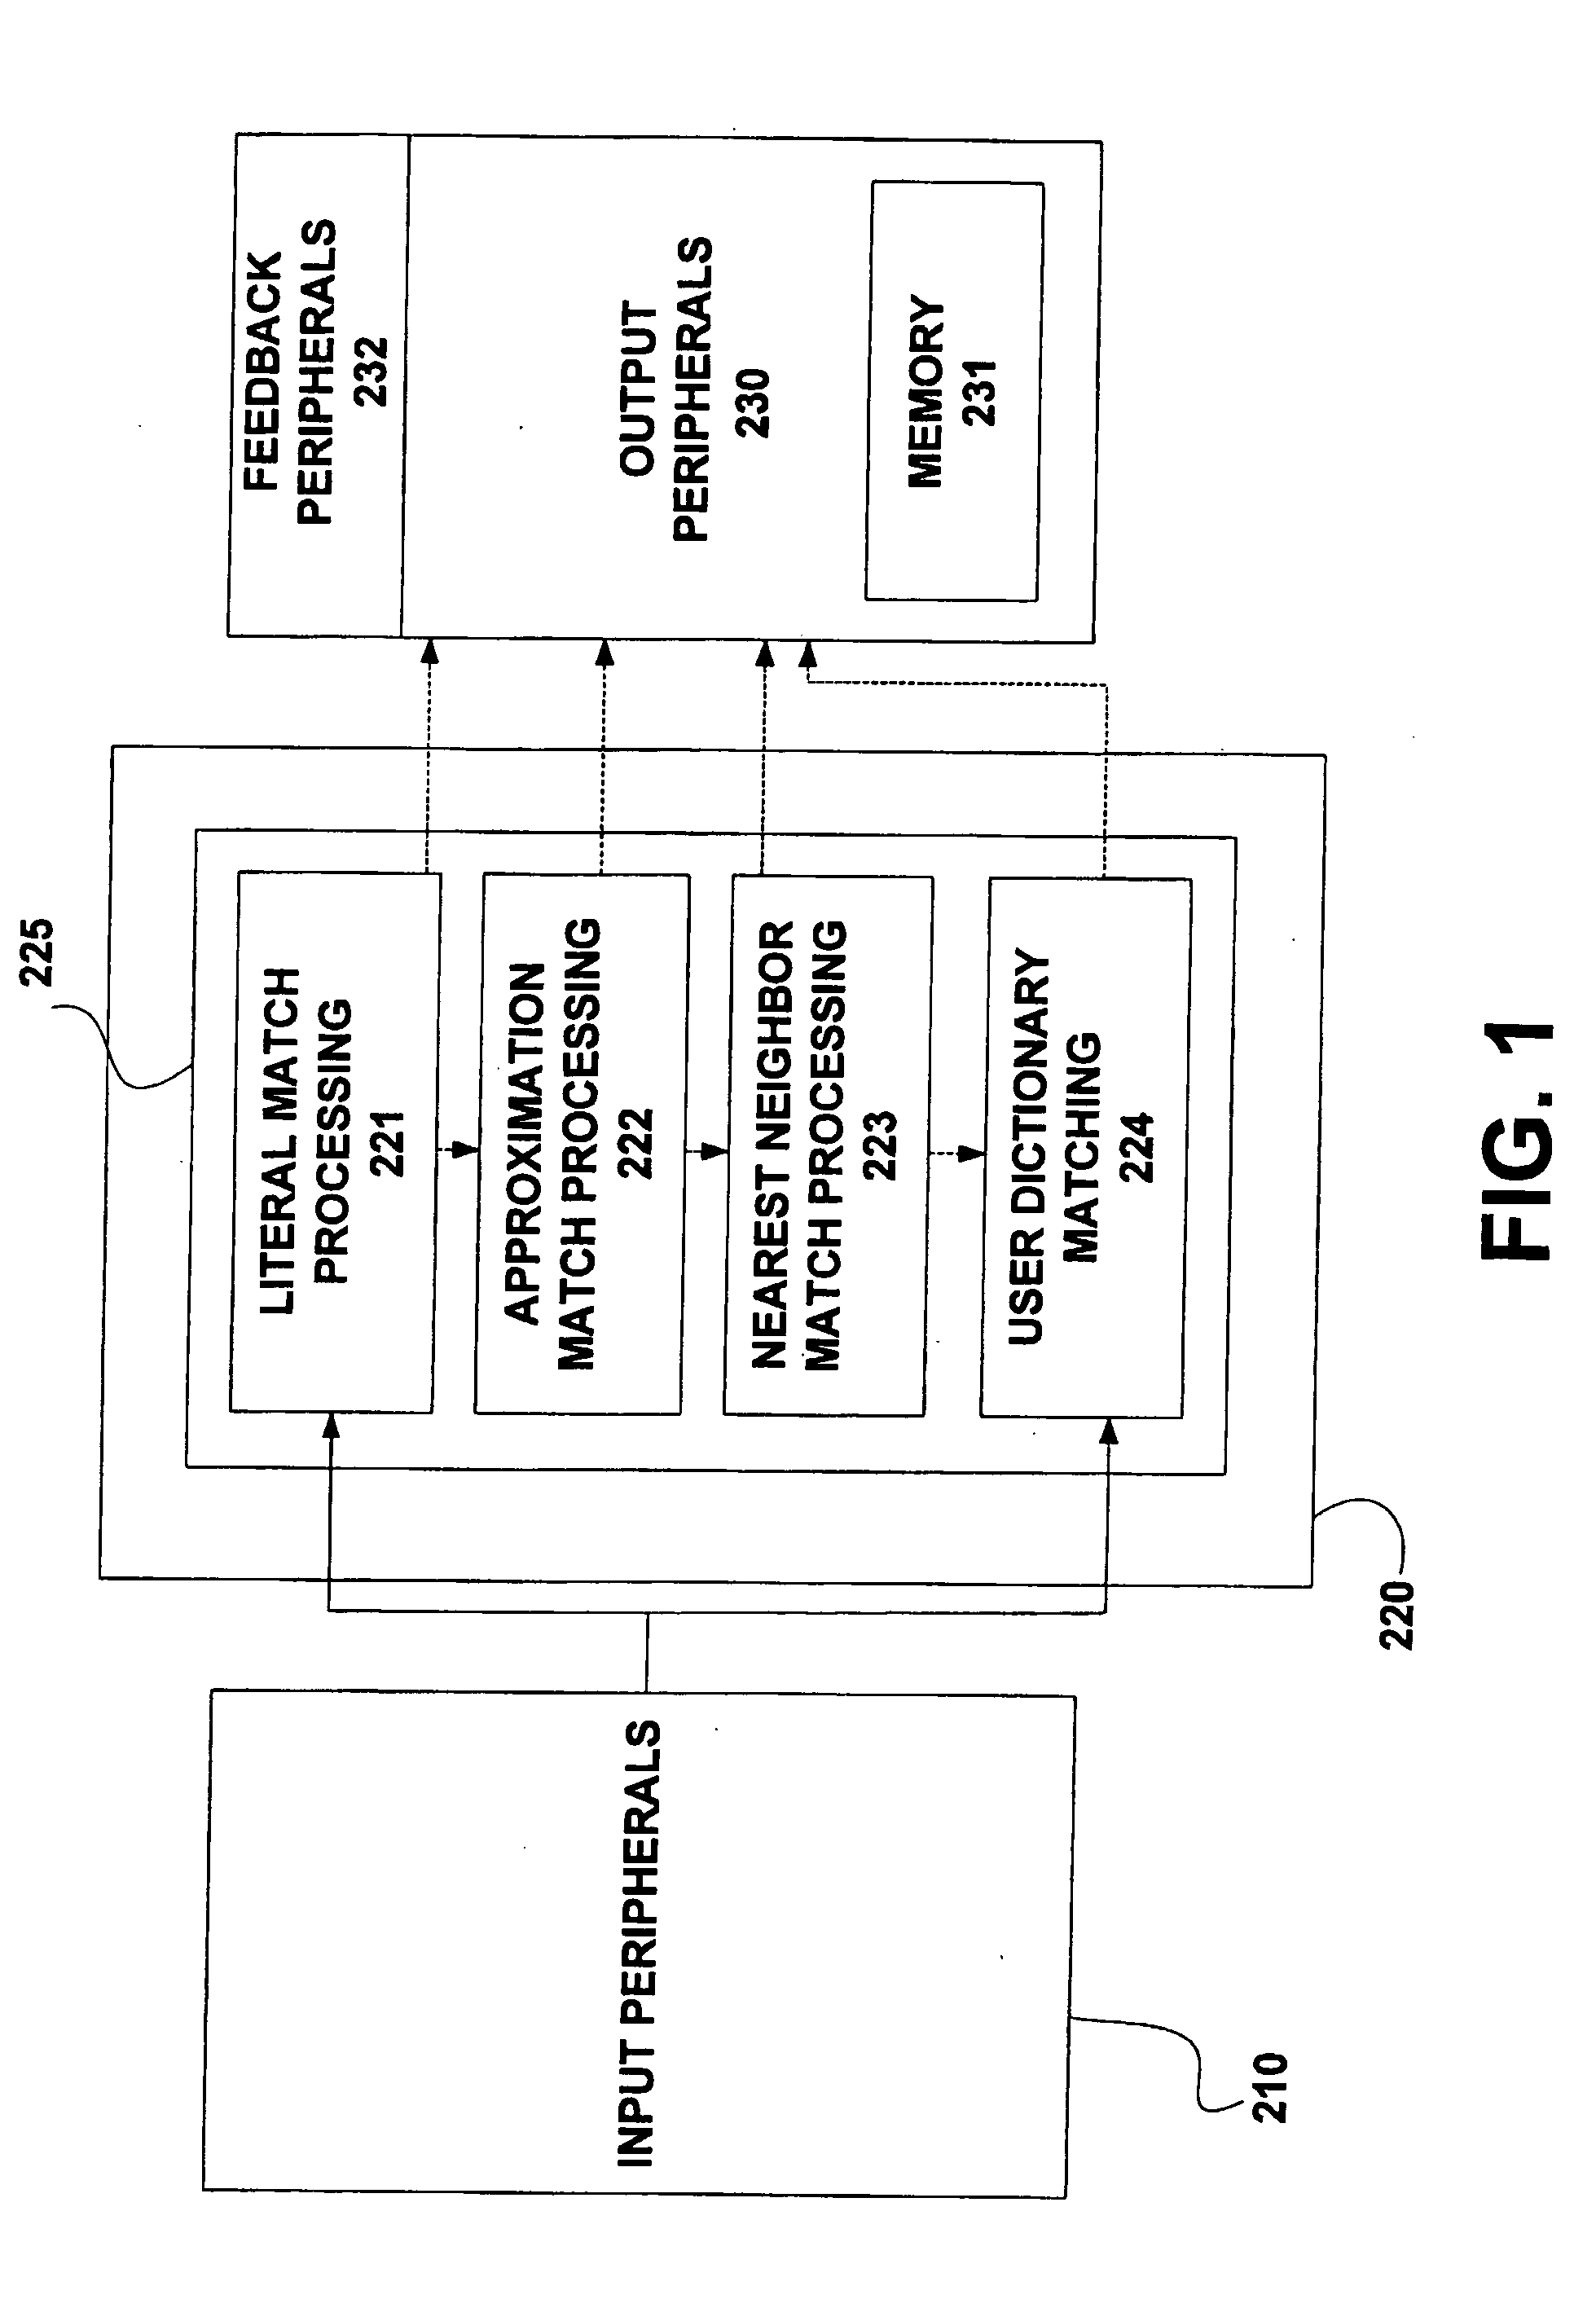 System and method for normalization of a string of words